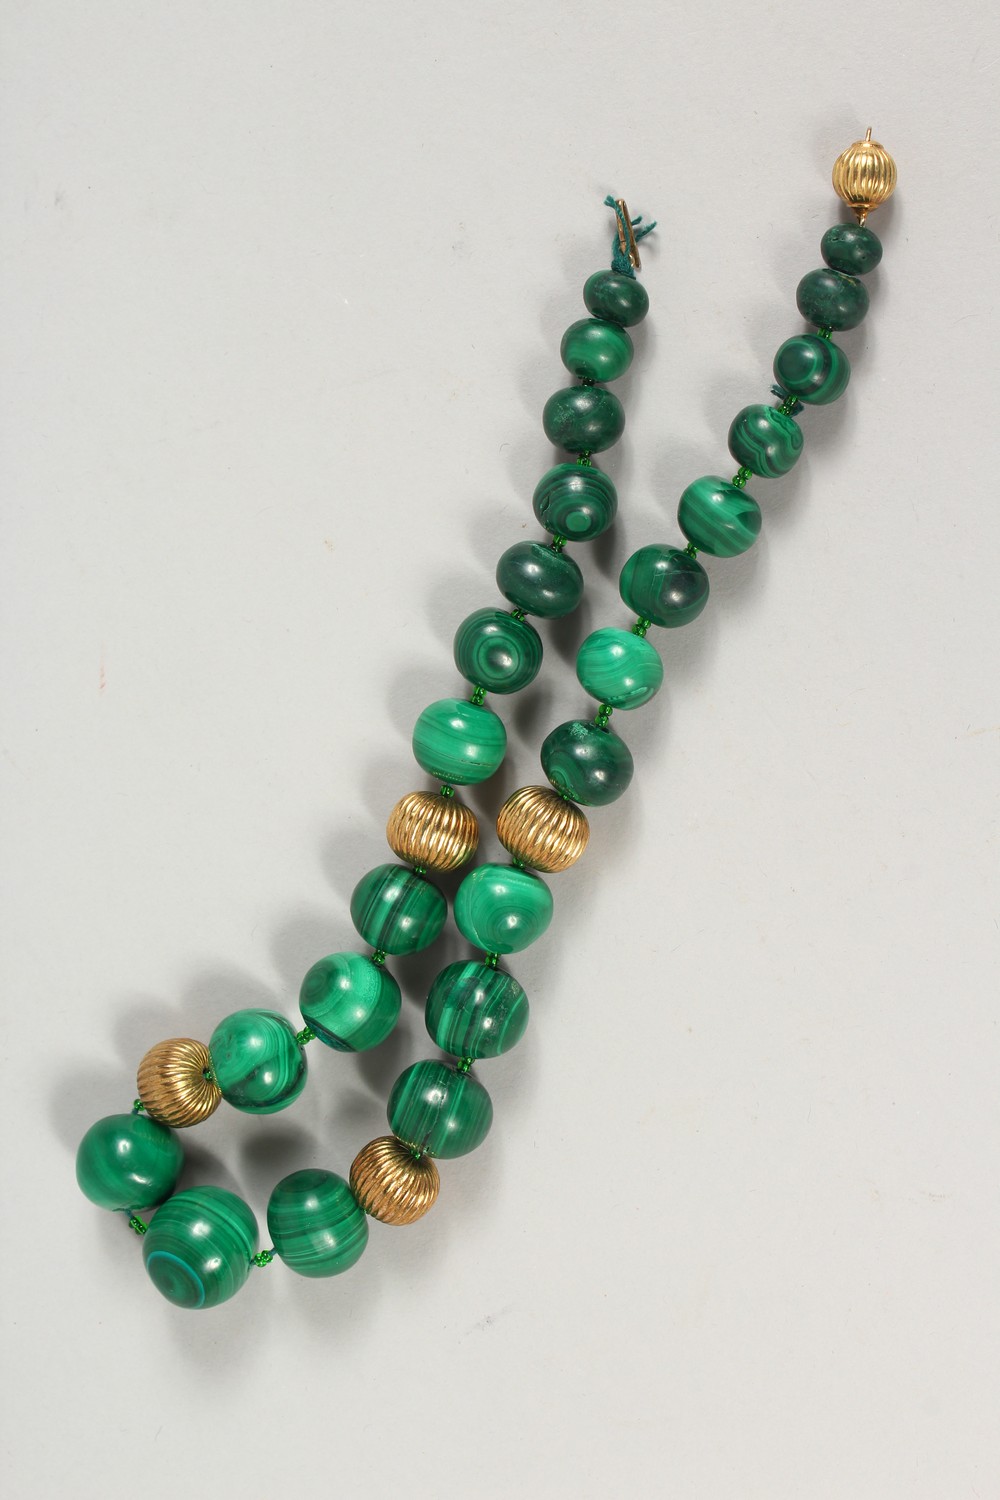 A GOOD CHINESE GREEN JADE / JADE LIKE SPHERICAL NECKLACE / BEADS 46CM, - Image 2 of 6